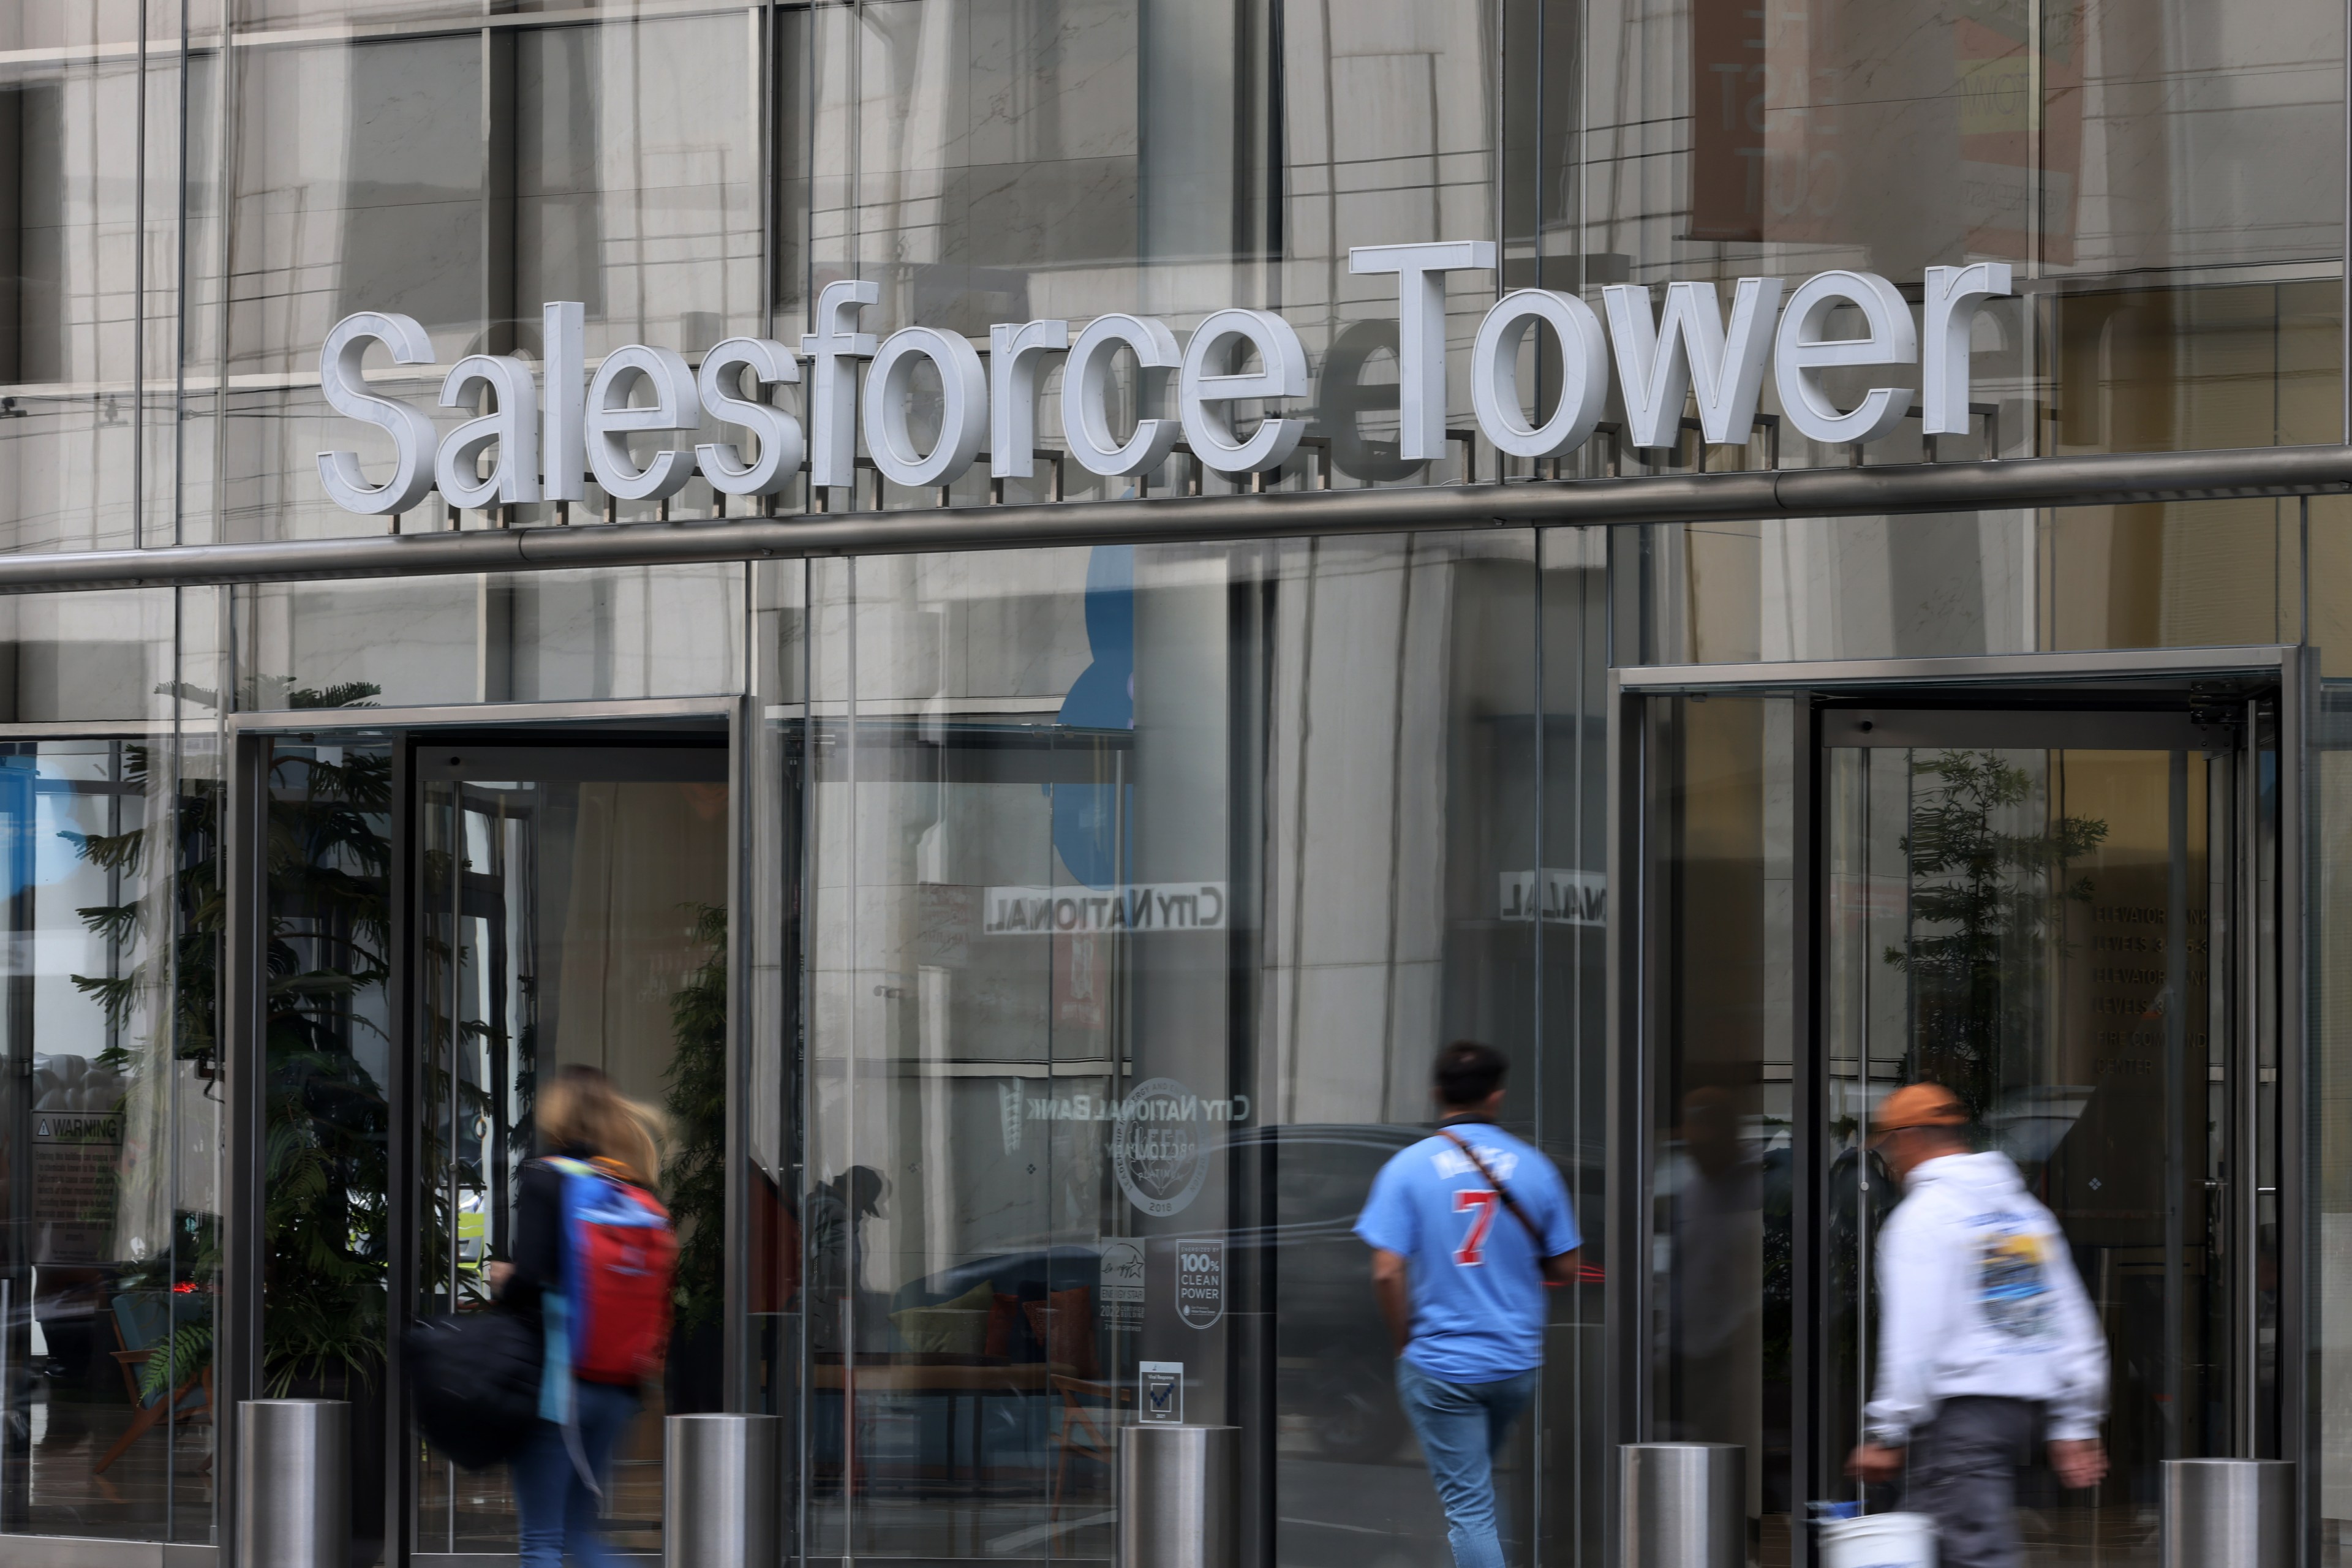 Sign "Salesforce Tower" above building entrance with people walking by.